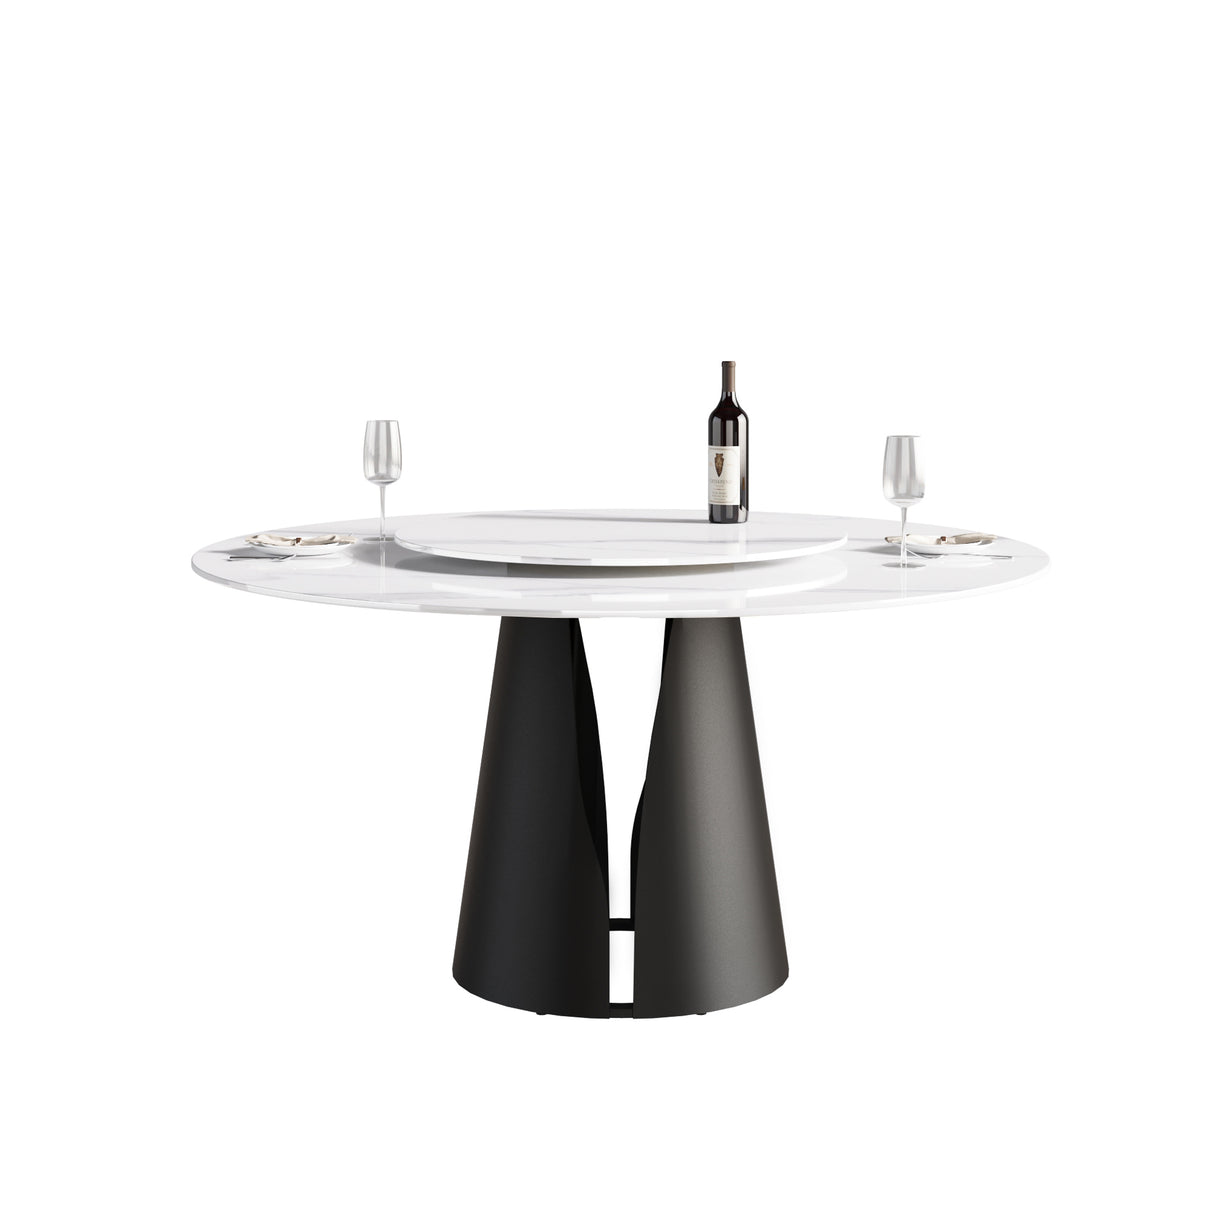 59.05"Modern artificial stone round black carbon steel base dining table-can accommodate 6 people-31.5"white artificial stone turntable - Home Elegance USA